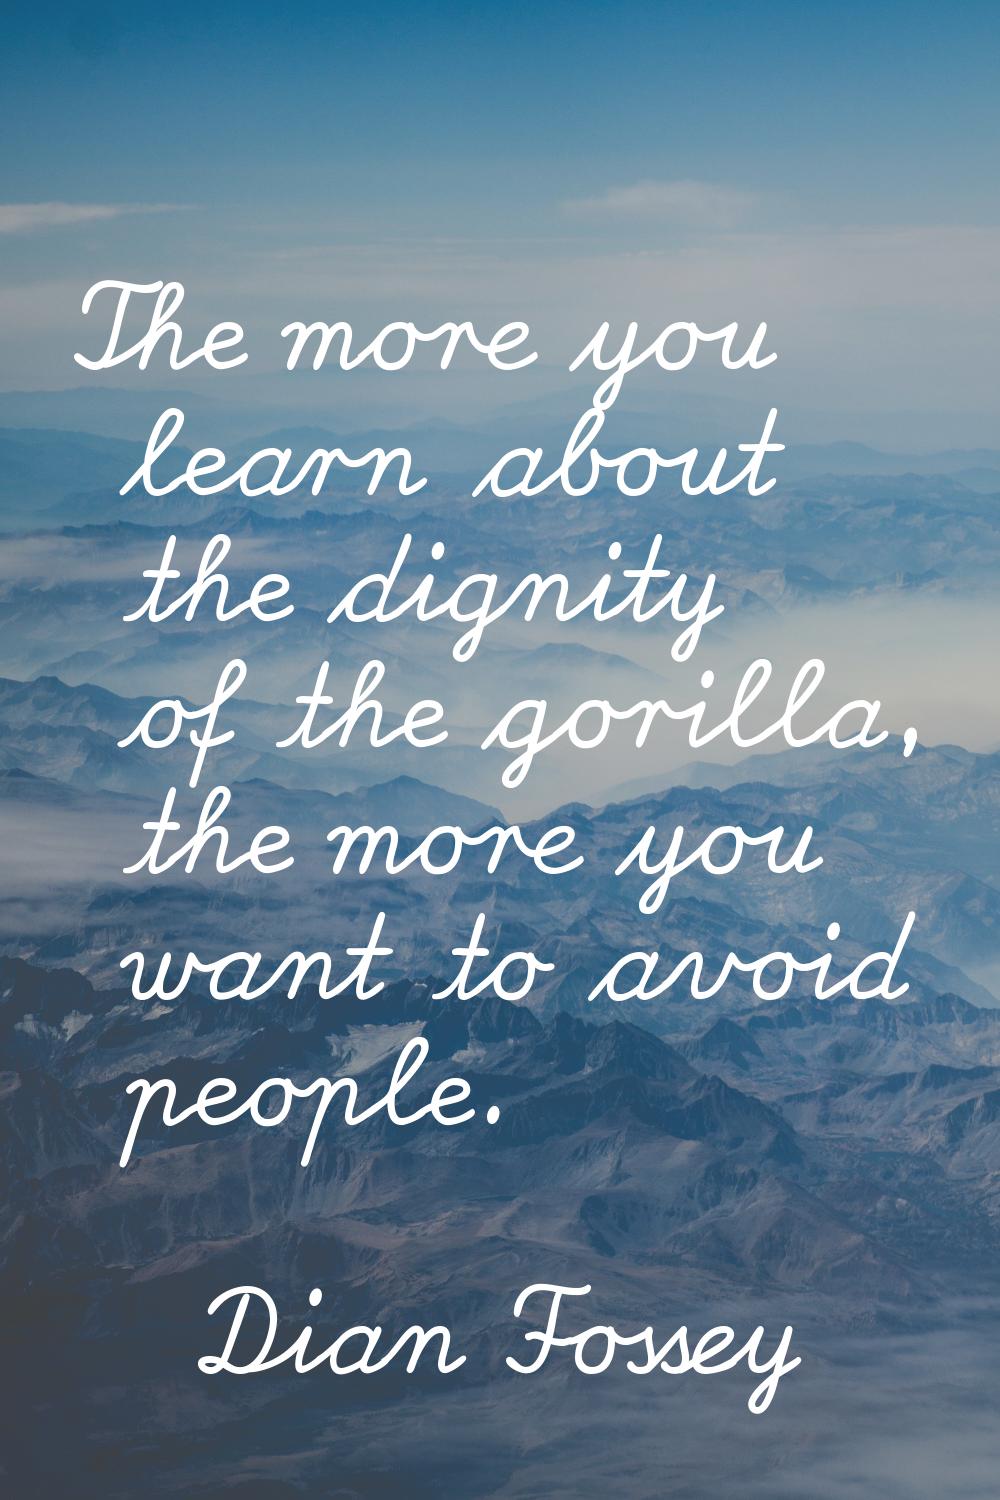 The more you learn about the dignity of the gorilla, the more you want to avoid people.